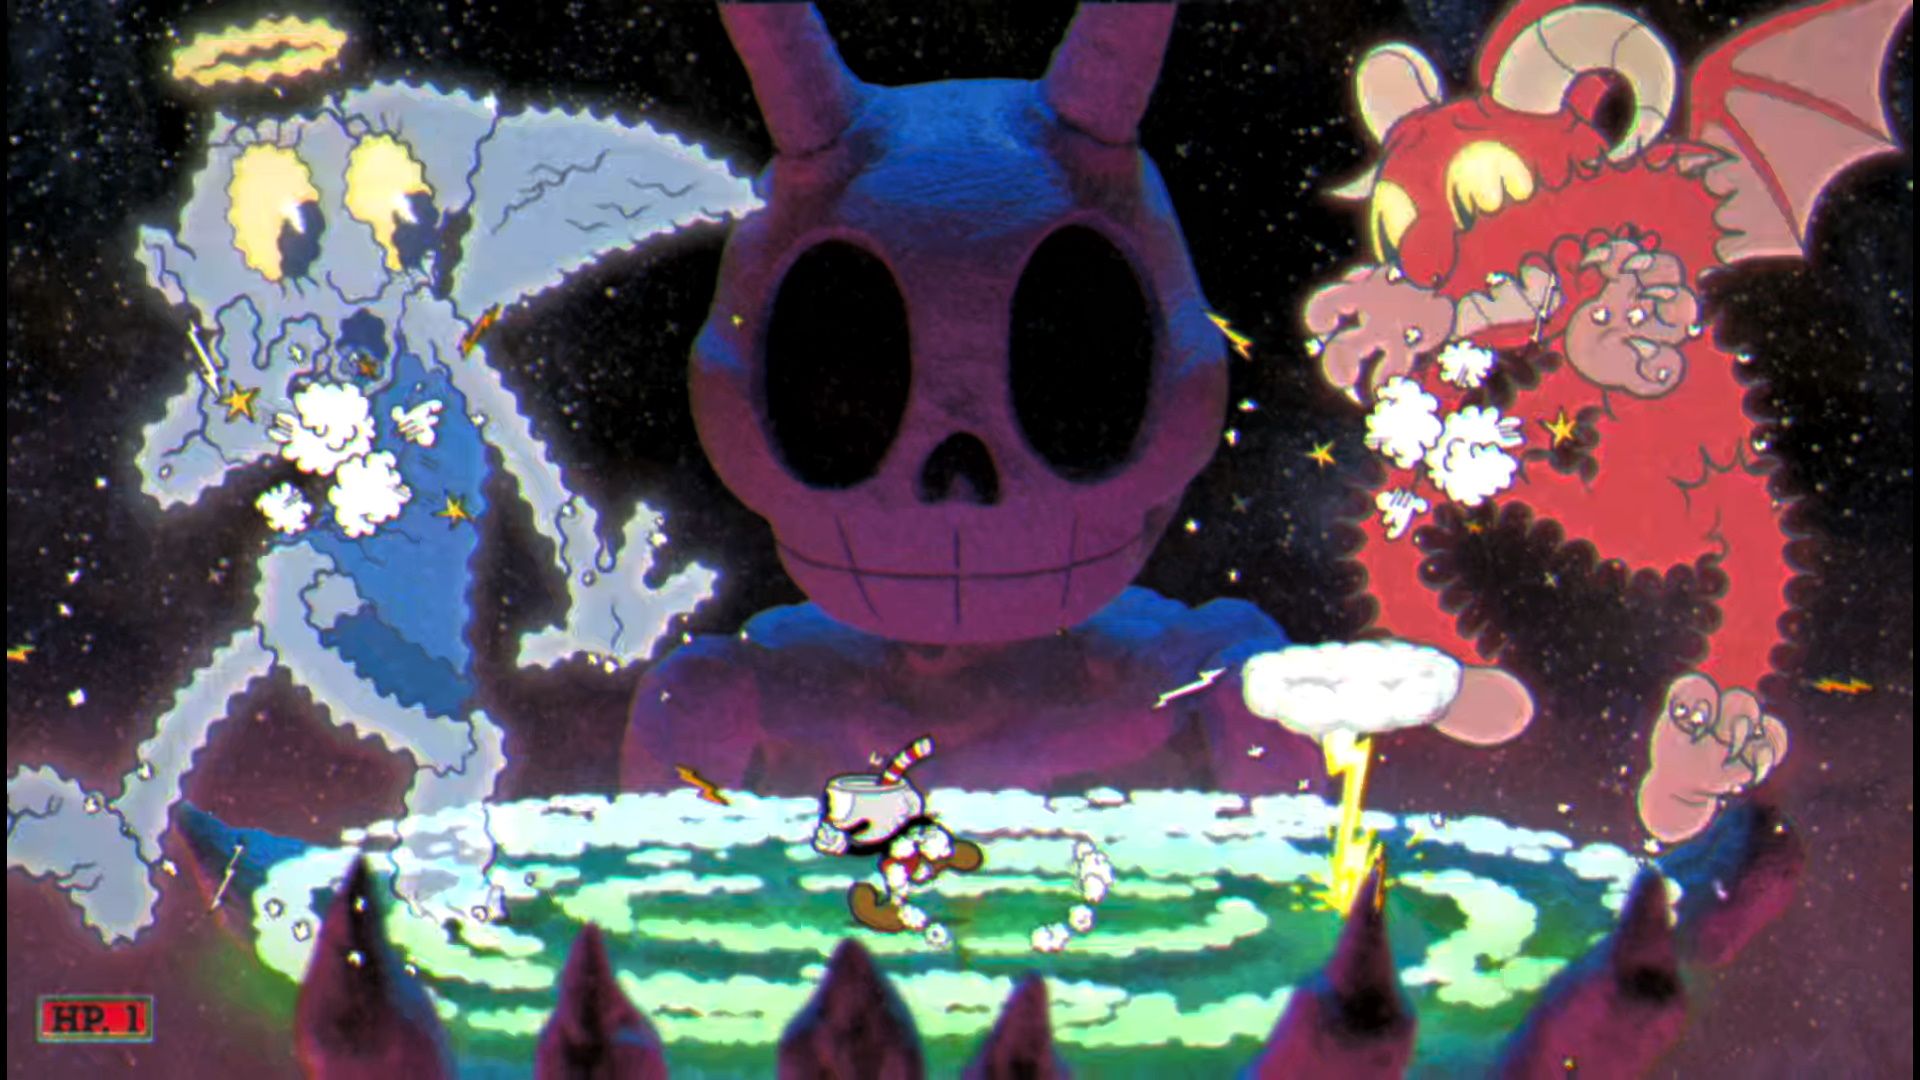 Cuphead The Delicious Course, The Angel And Devil, Victory